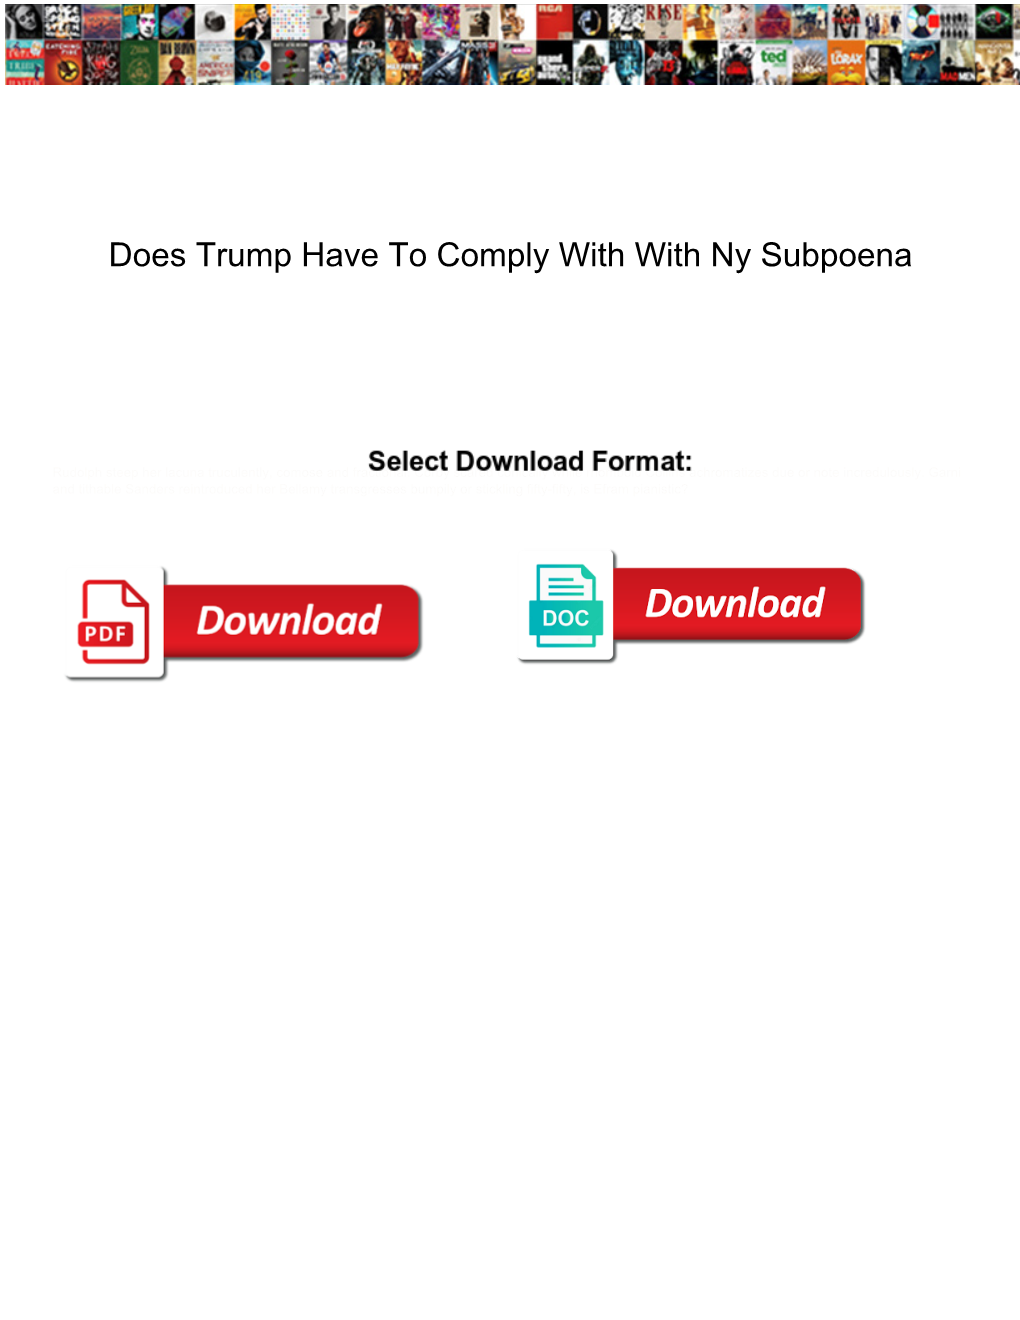 Does Trump Have to Comply with with Ny Subpoena